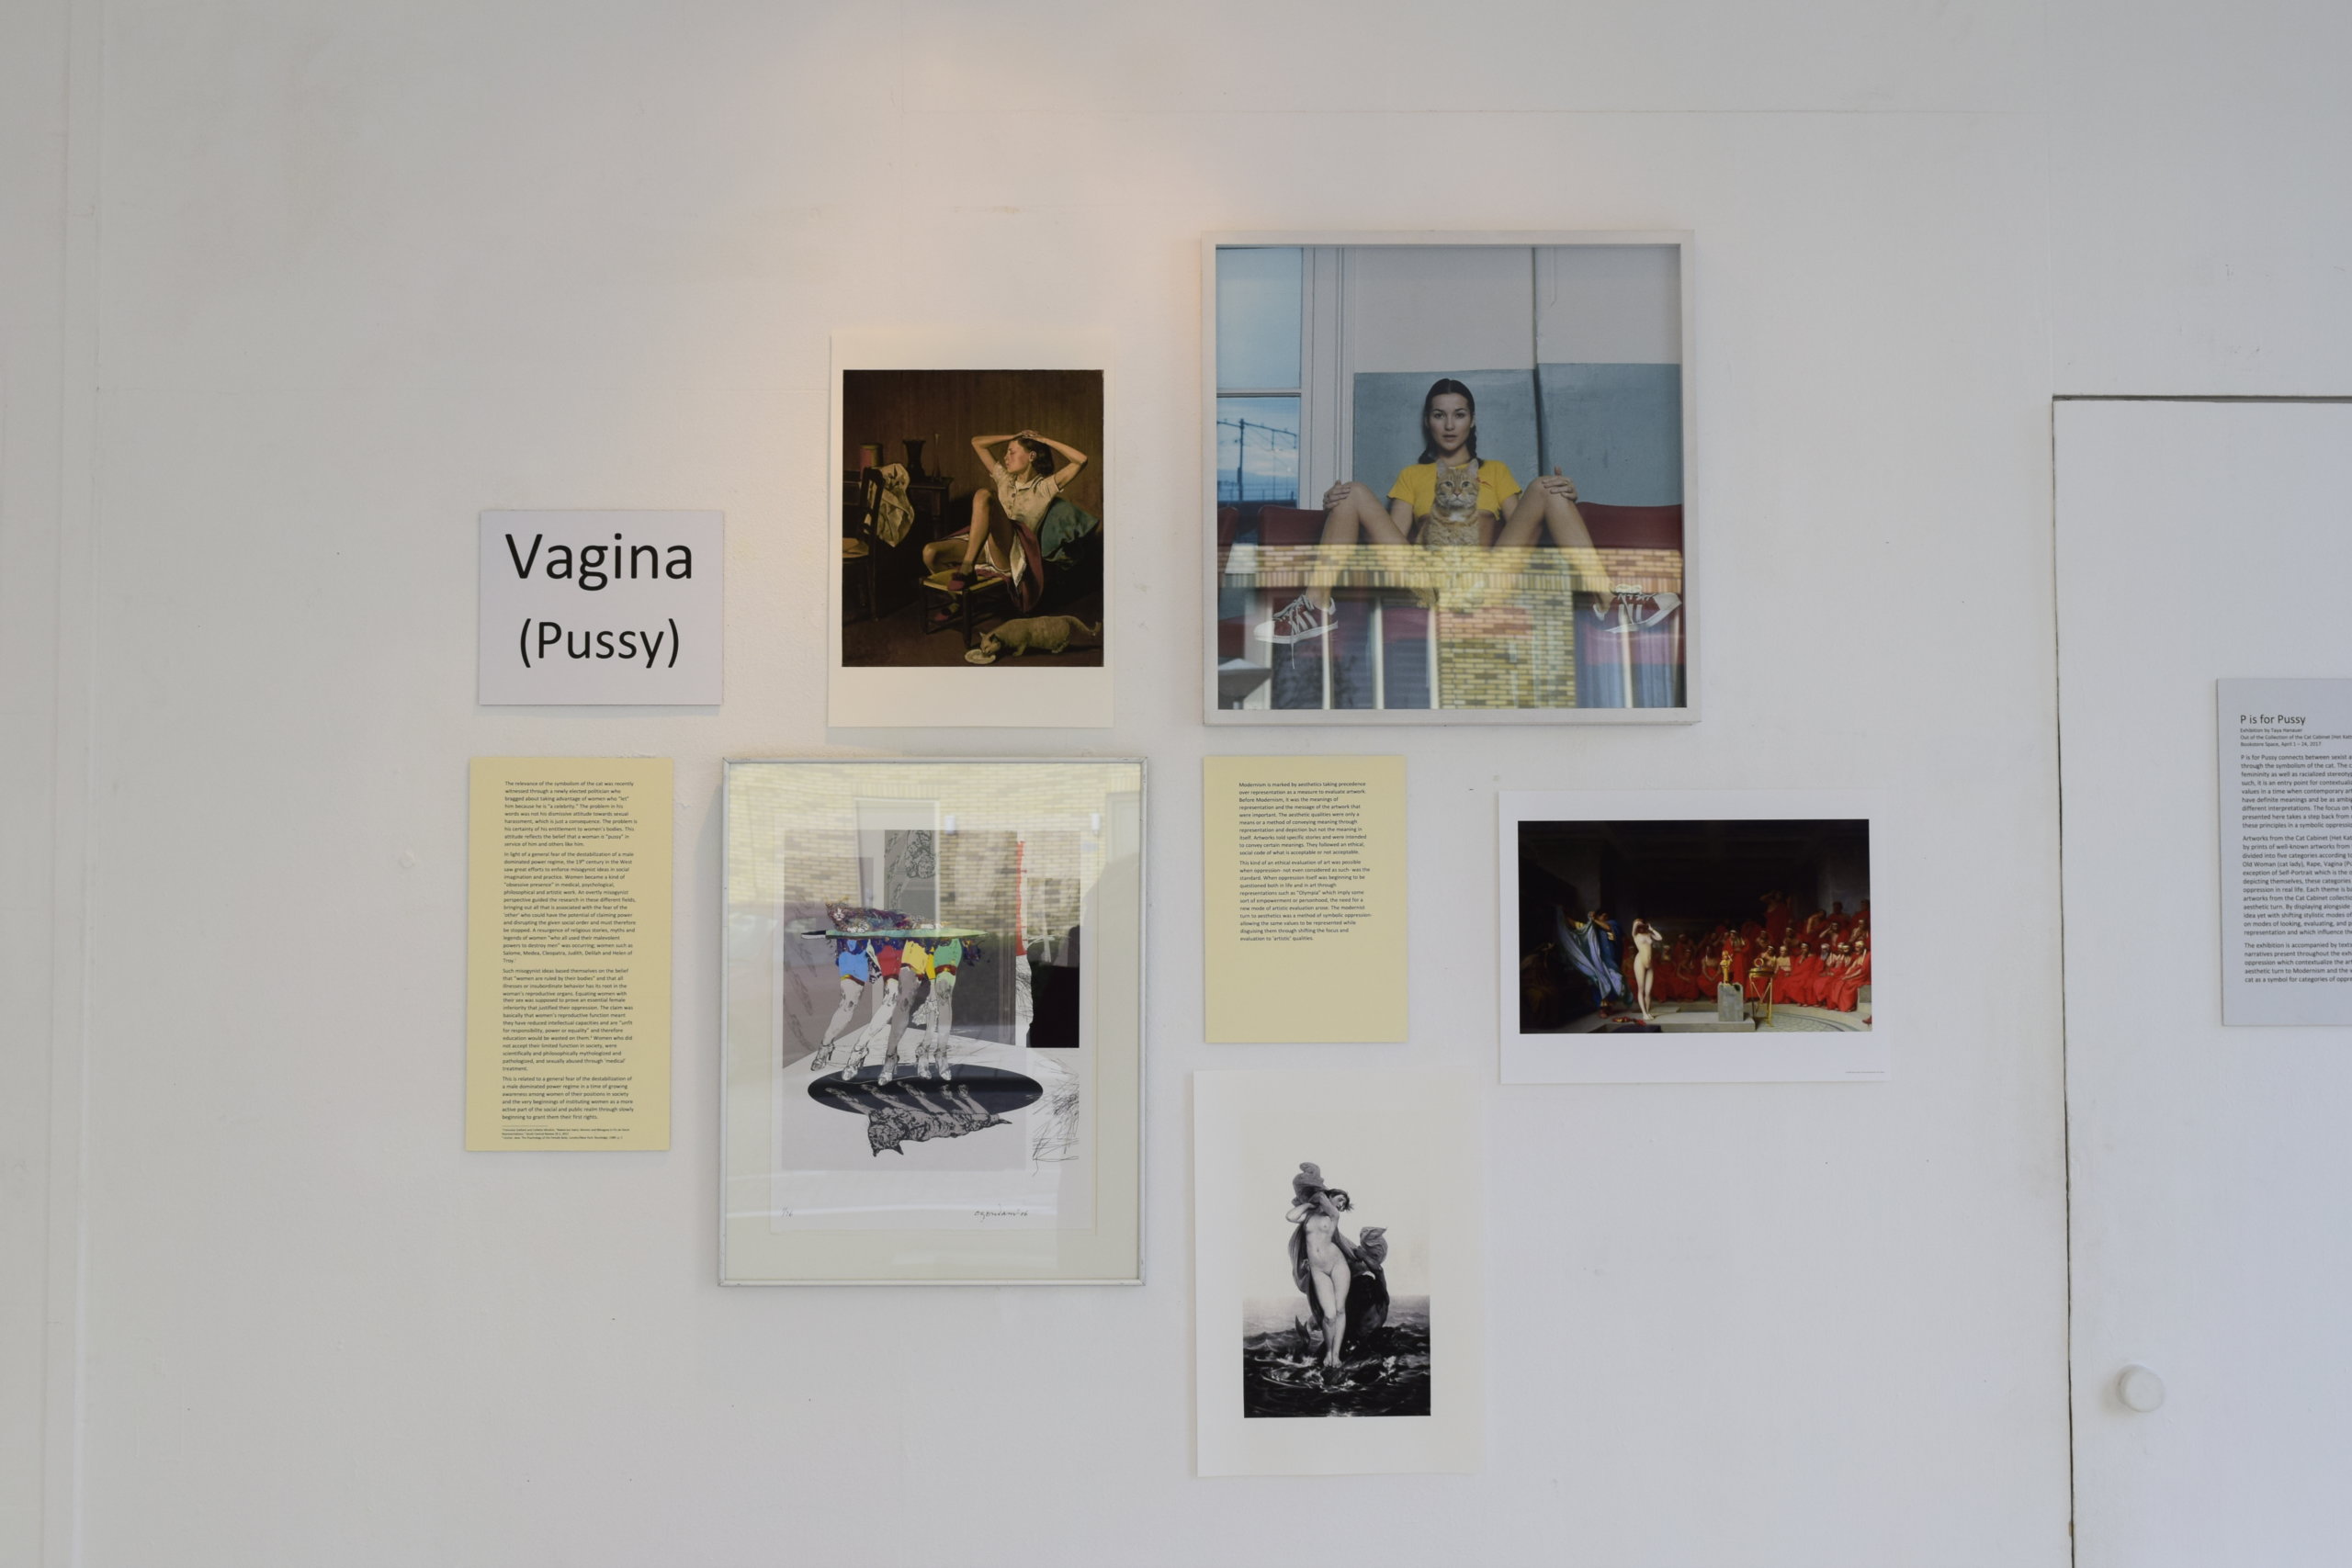 image of a part of an exhibition showing various artworks